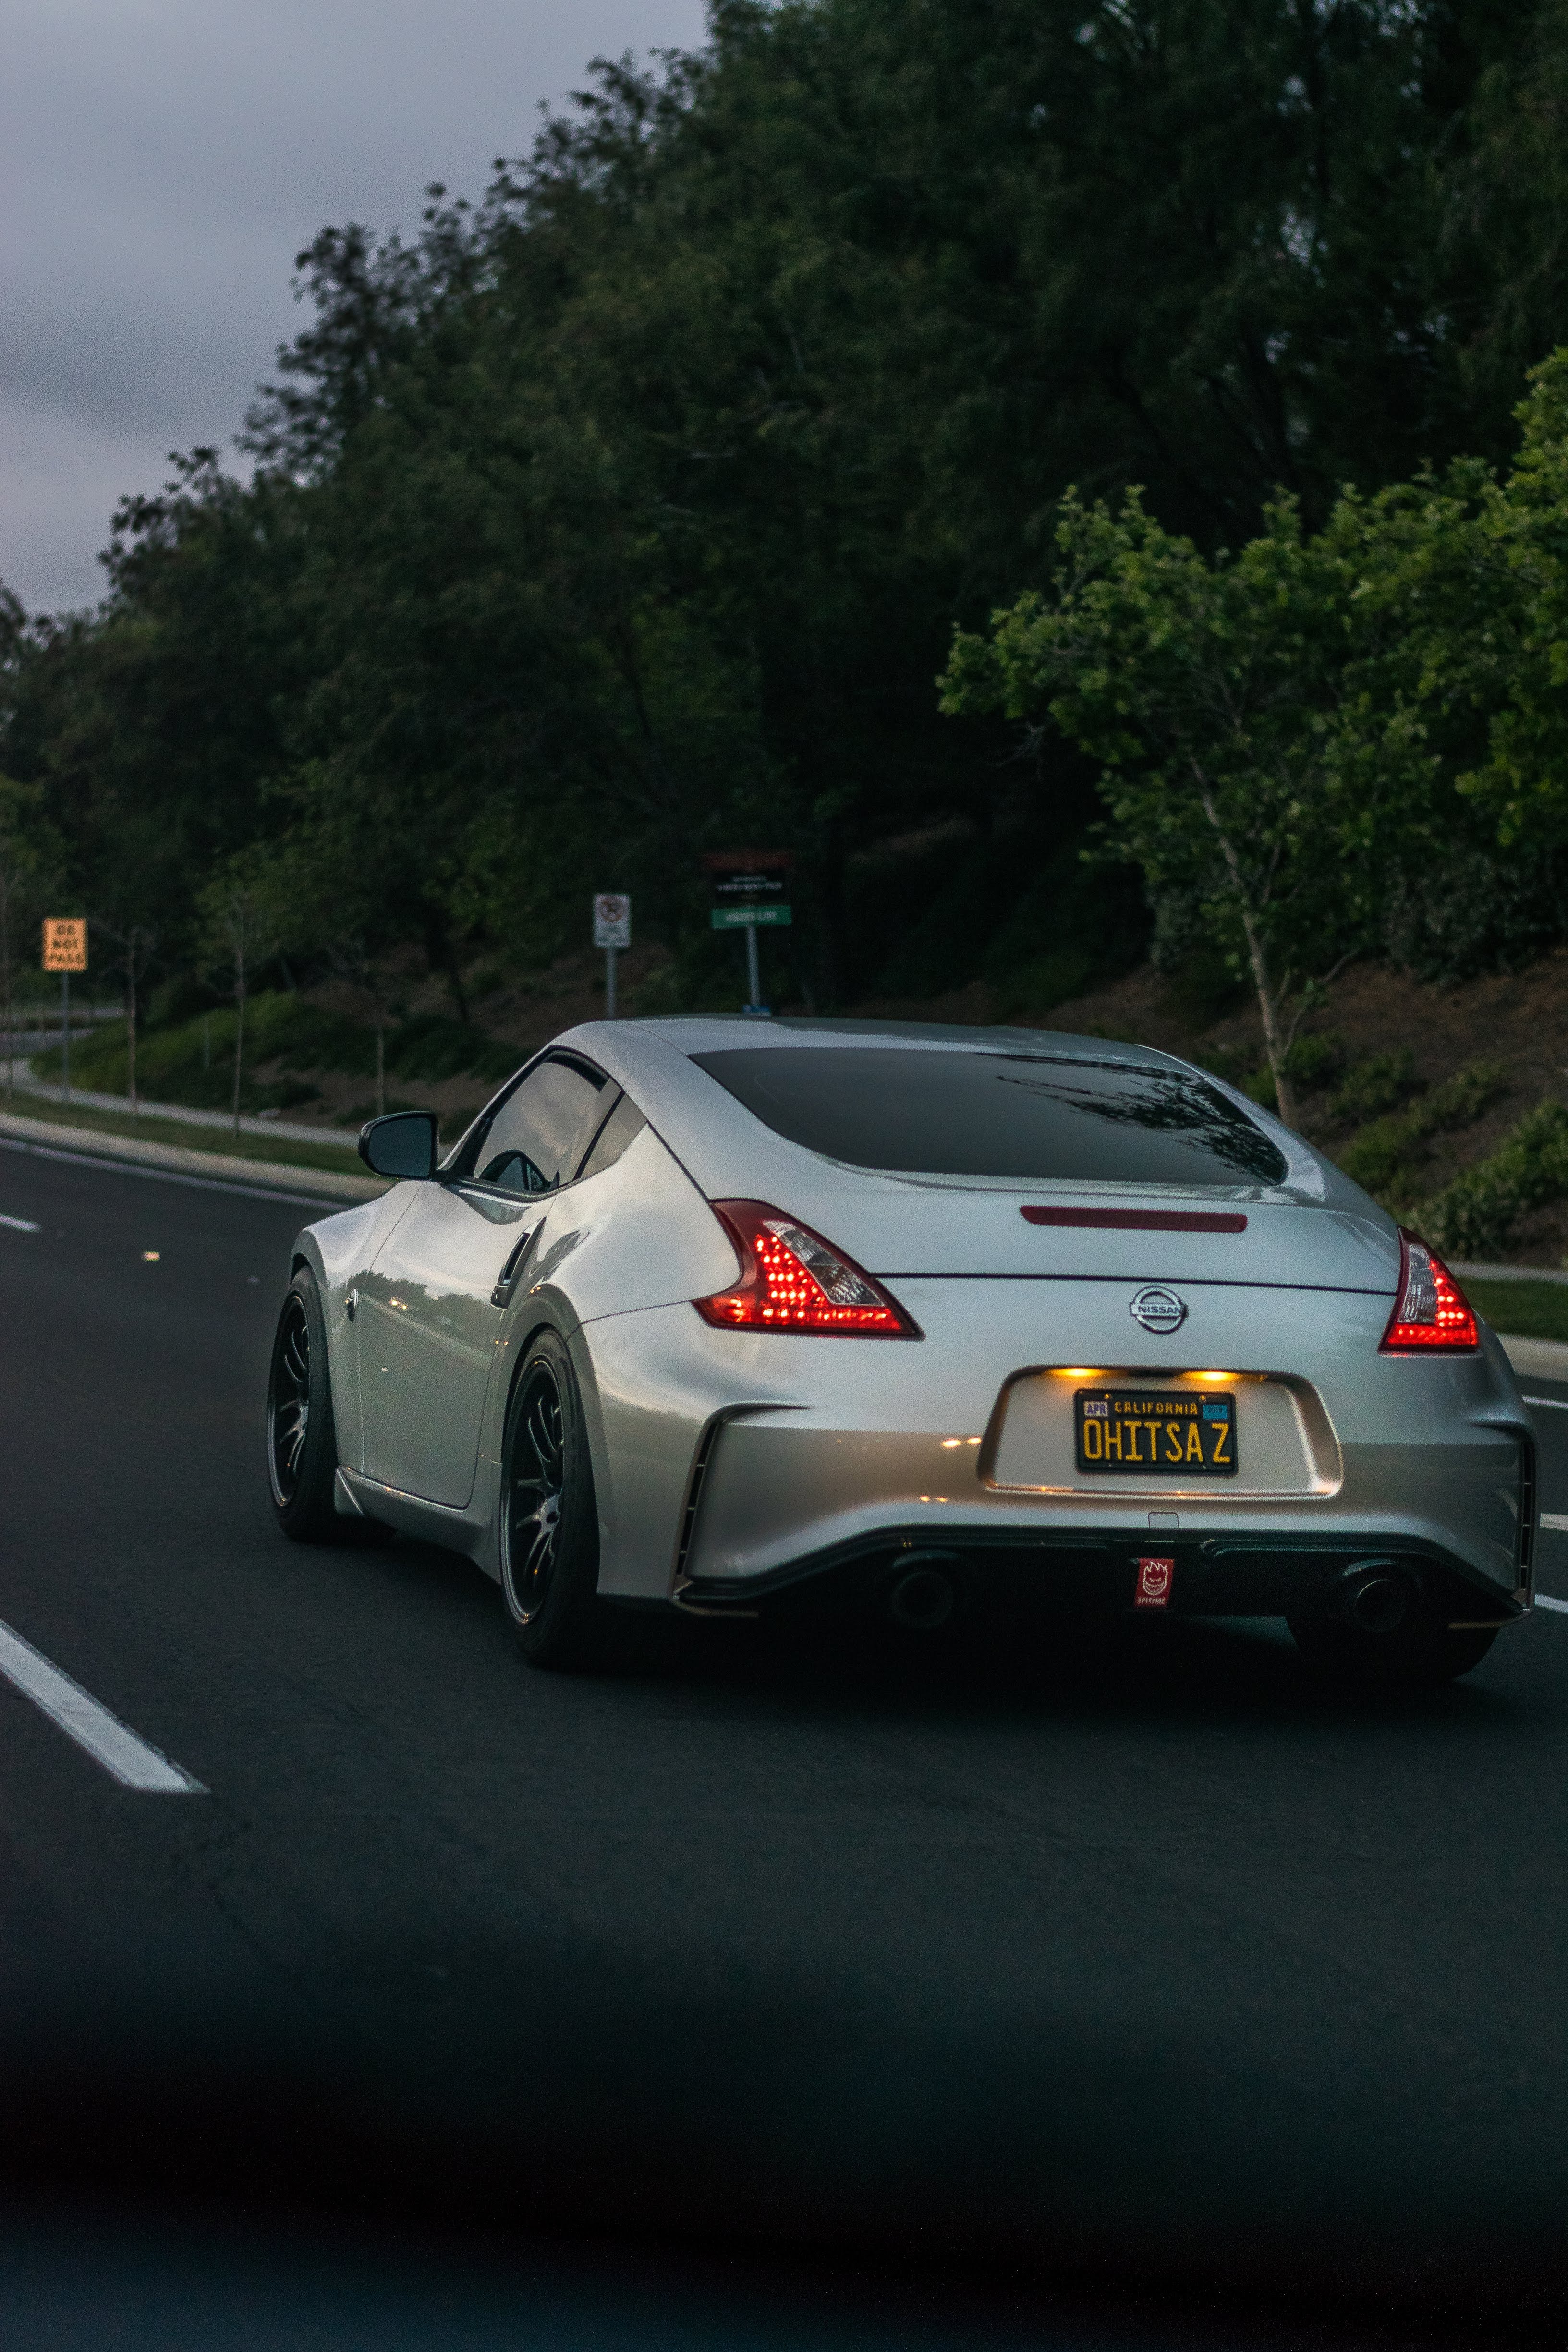 cars, nissan 370z, road, traffic, movement, silver, silvery